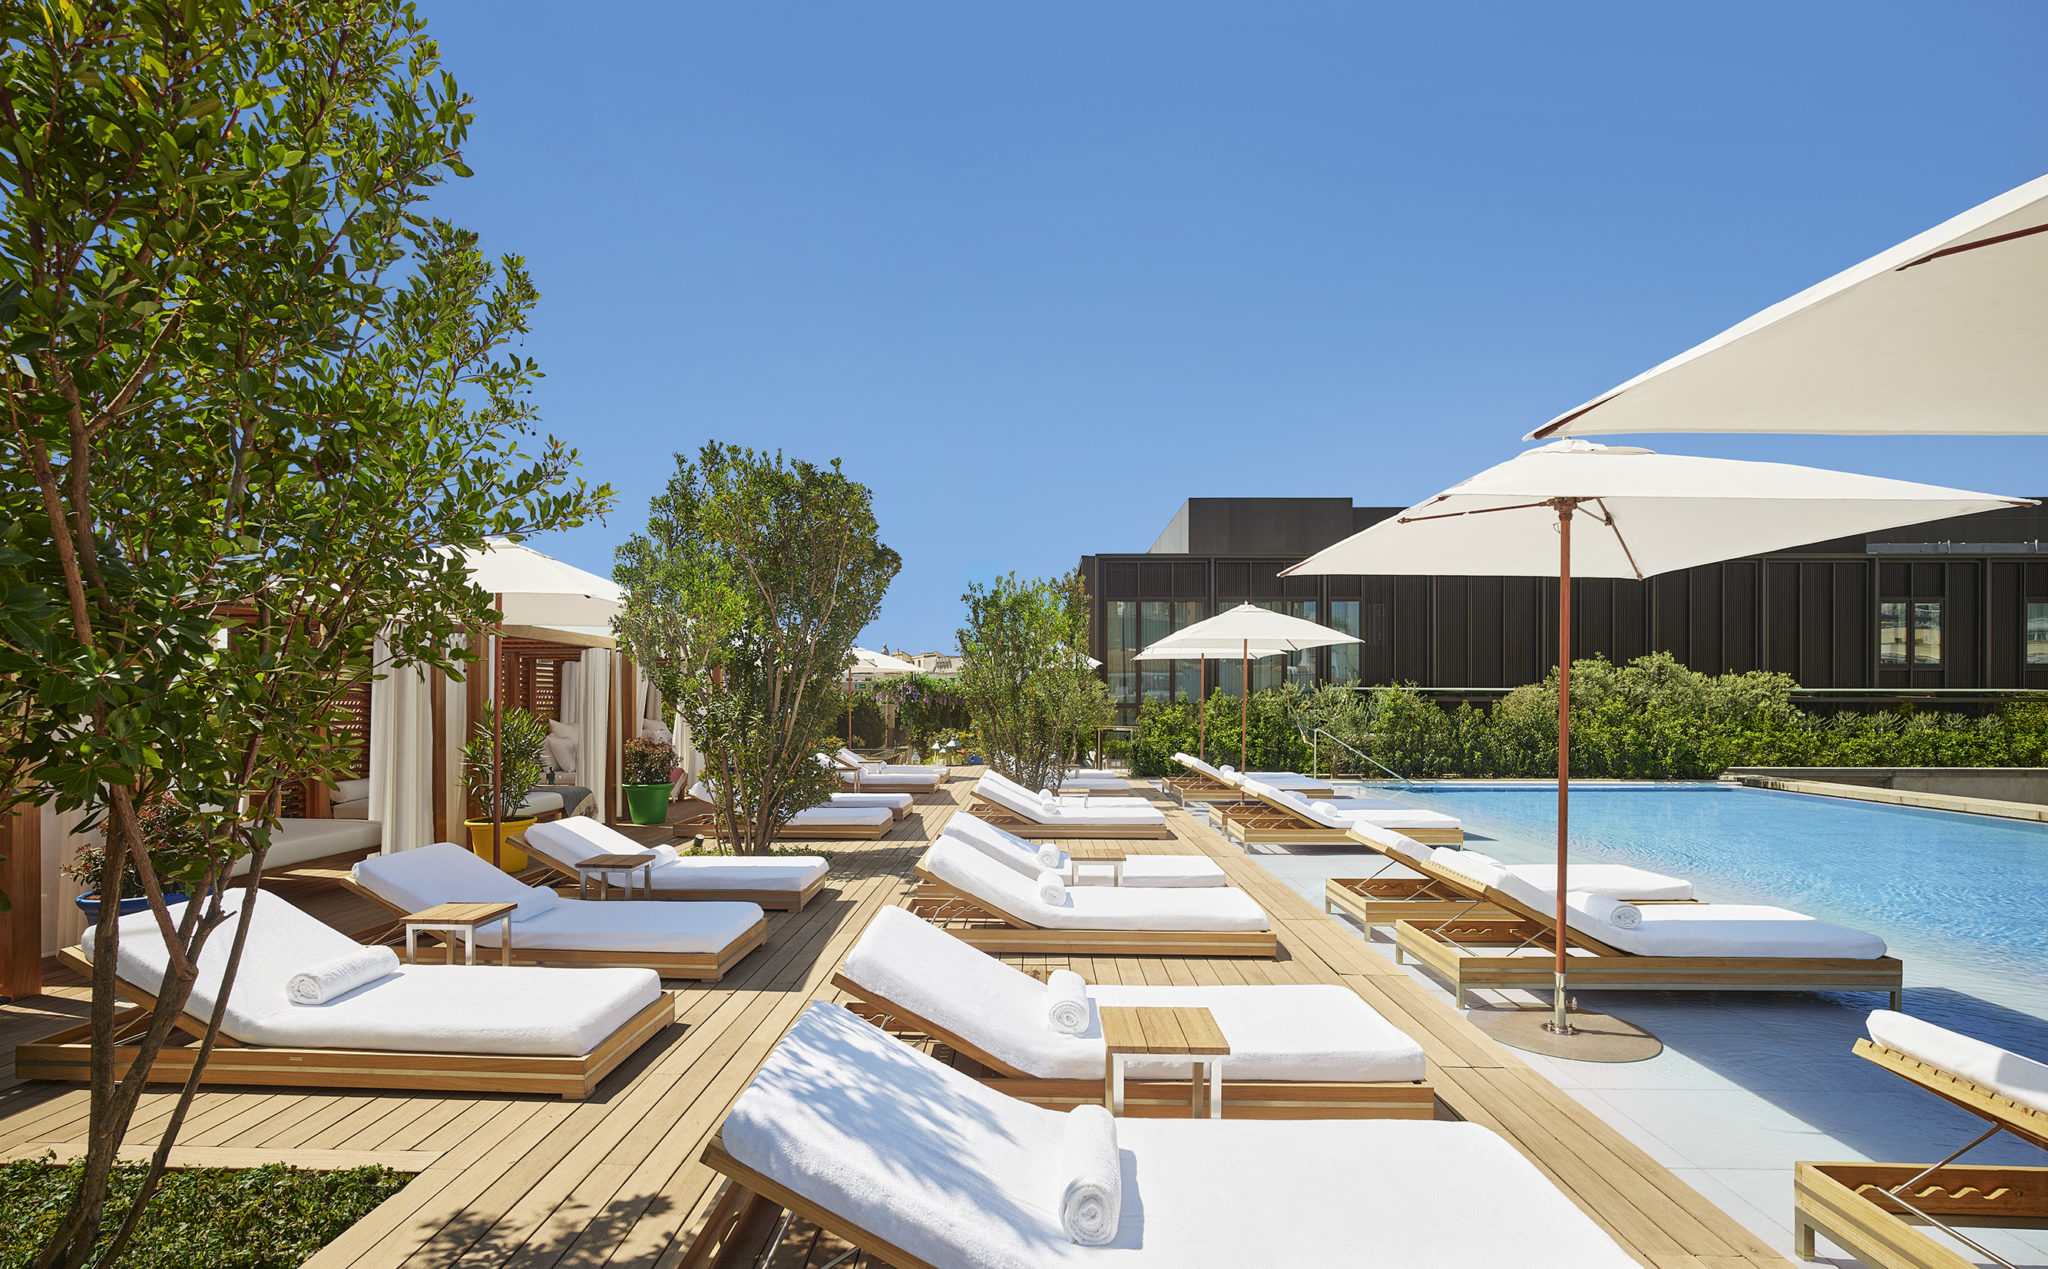 Sun loungers and umbrellas poolside